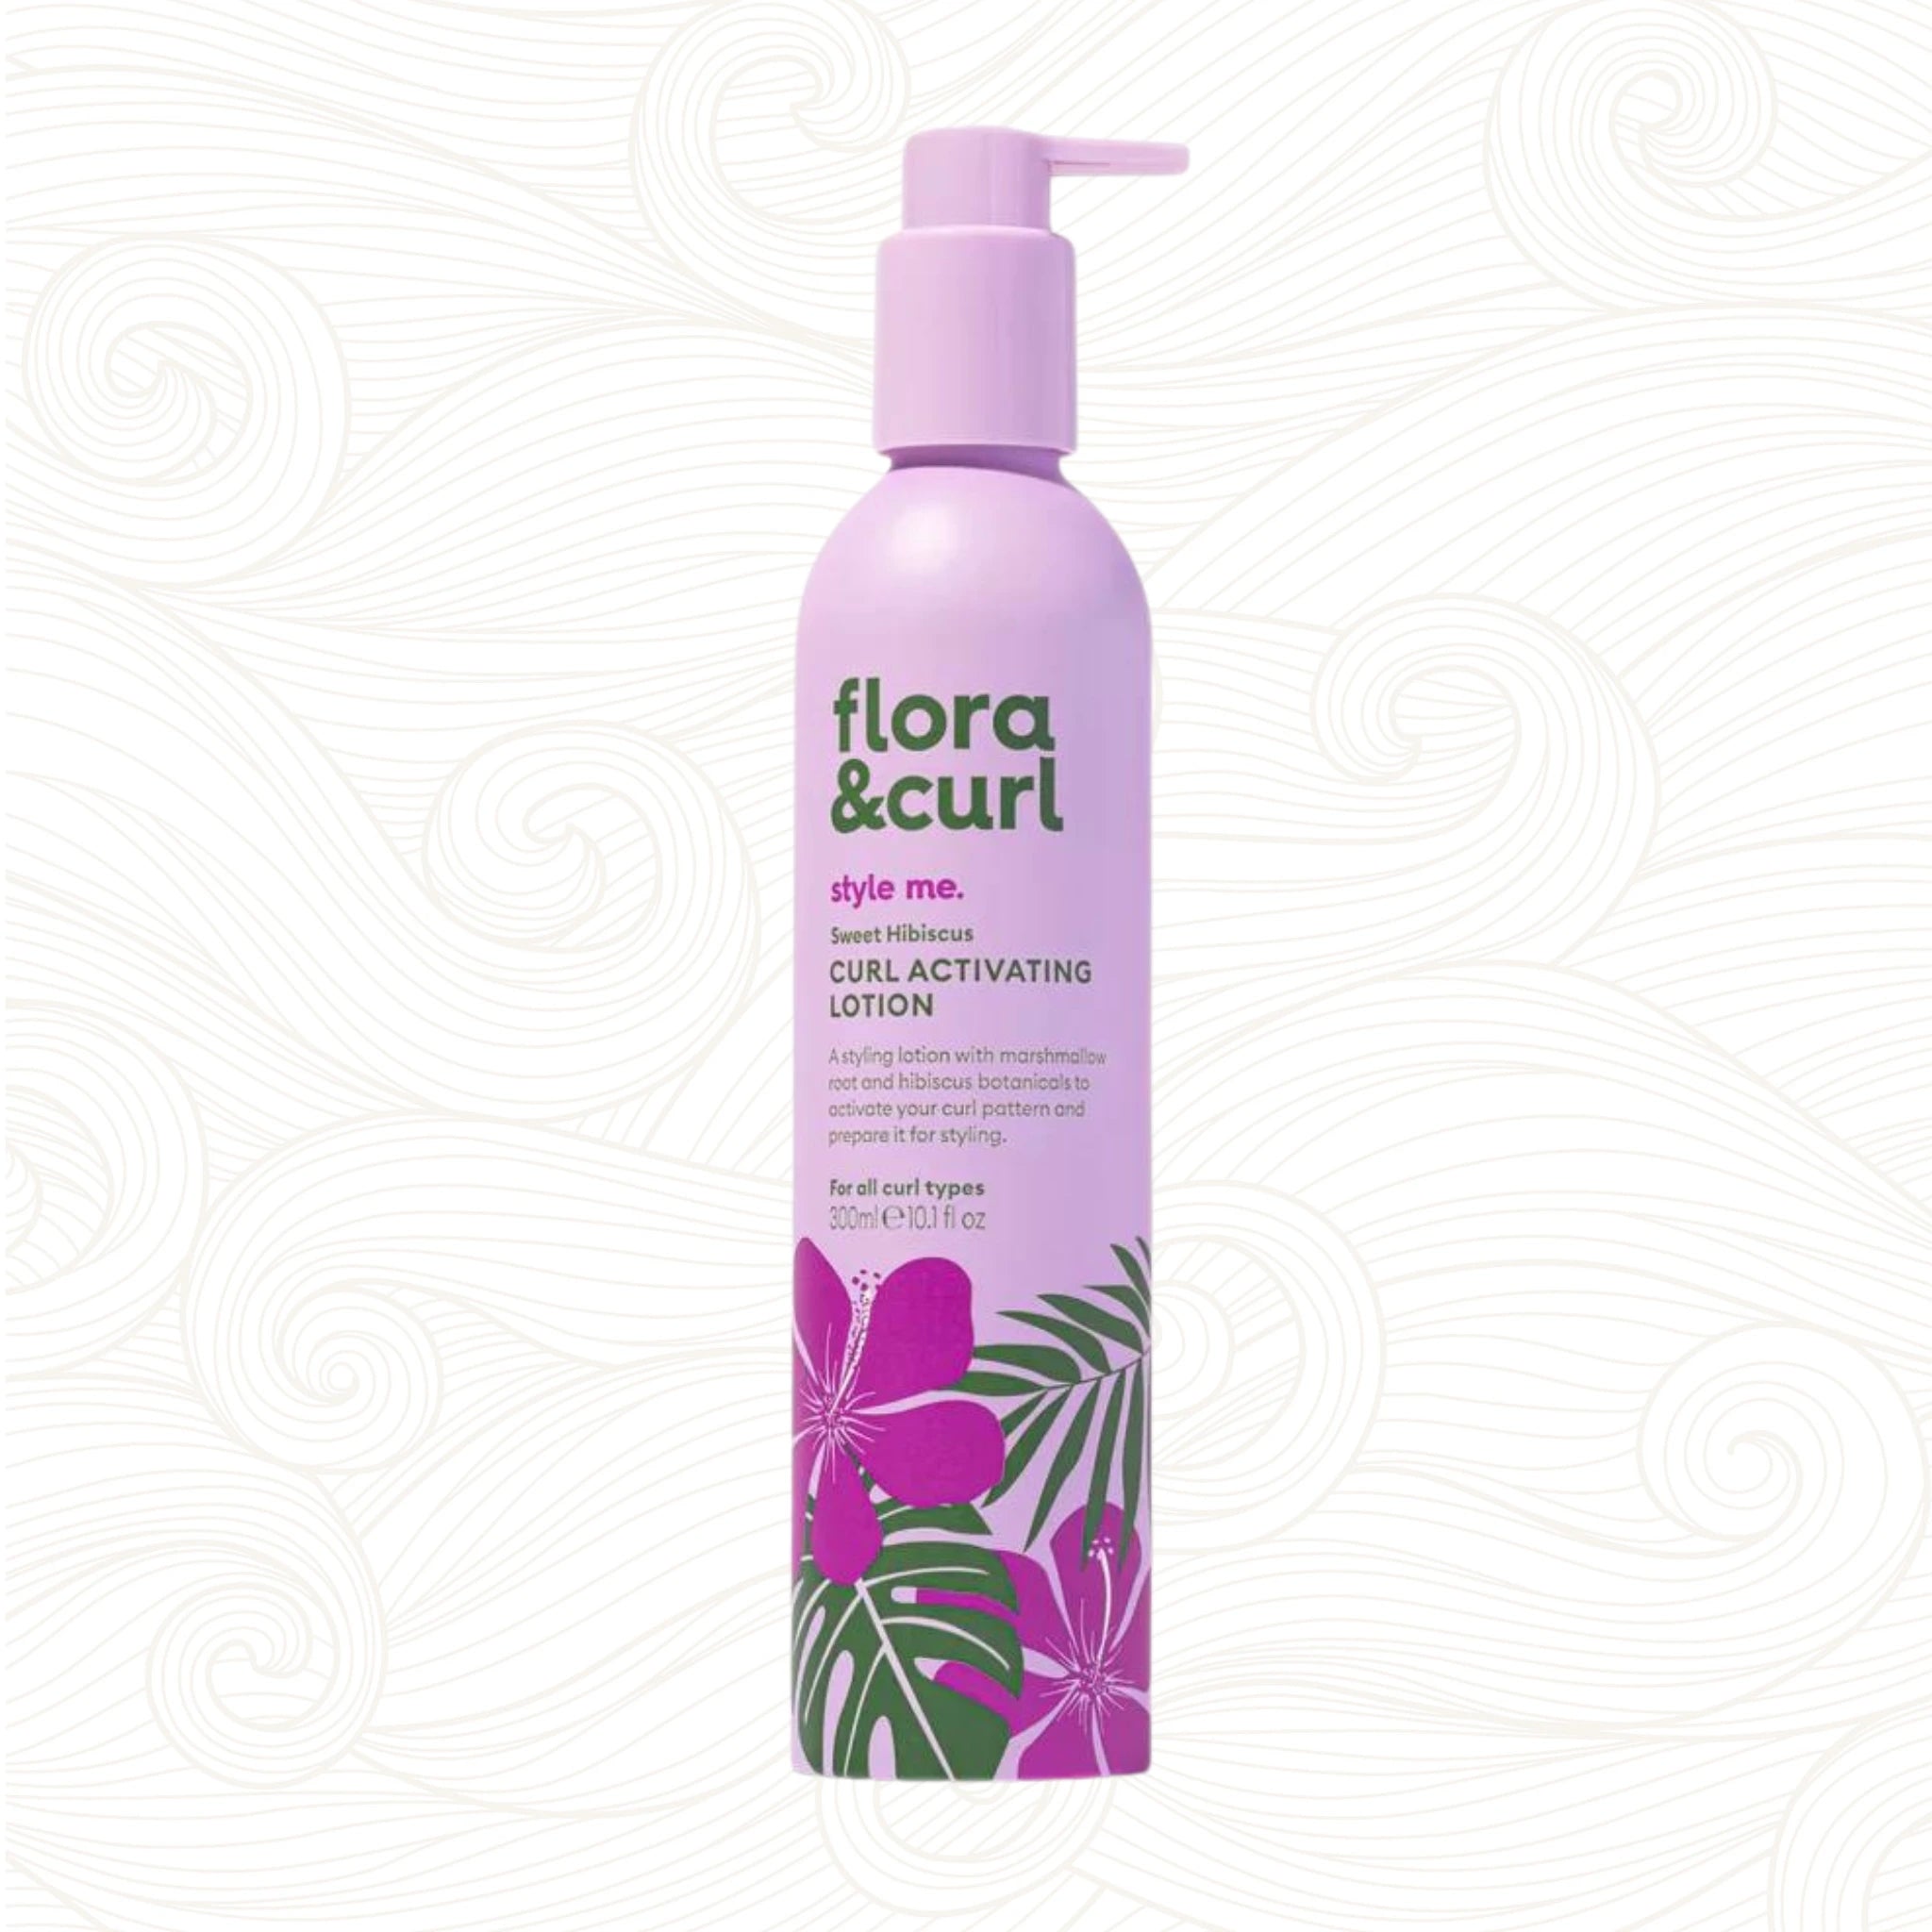 Flora & Curl | Sweet Hibiscus Curl Activating Lotion /ab 300ml Lotion Flora & Curl